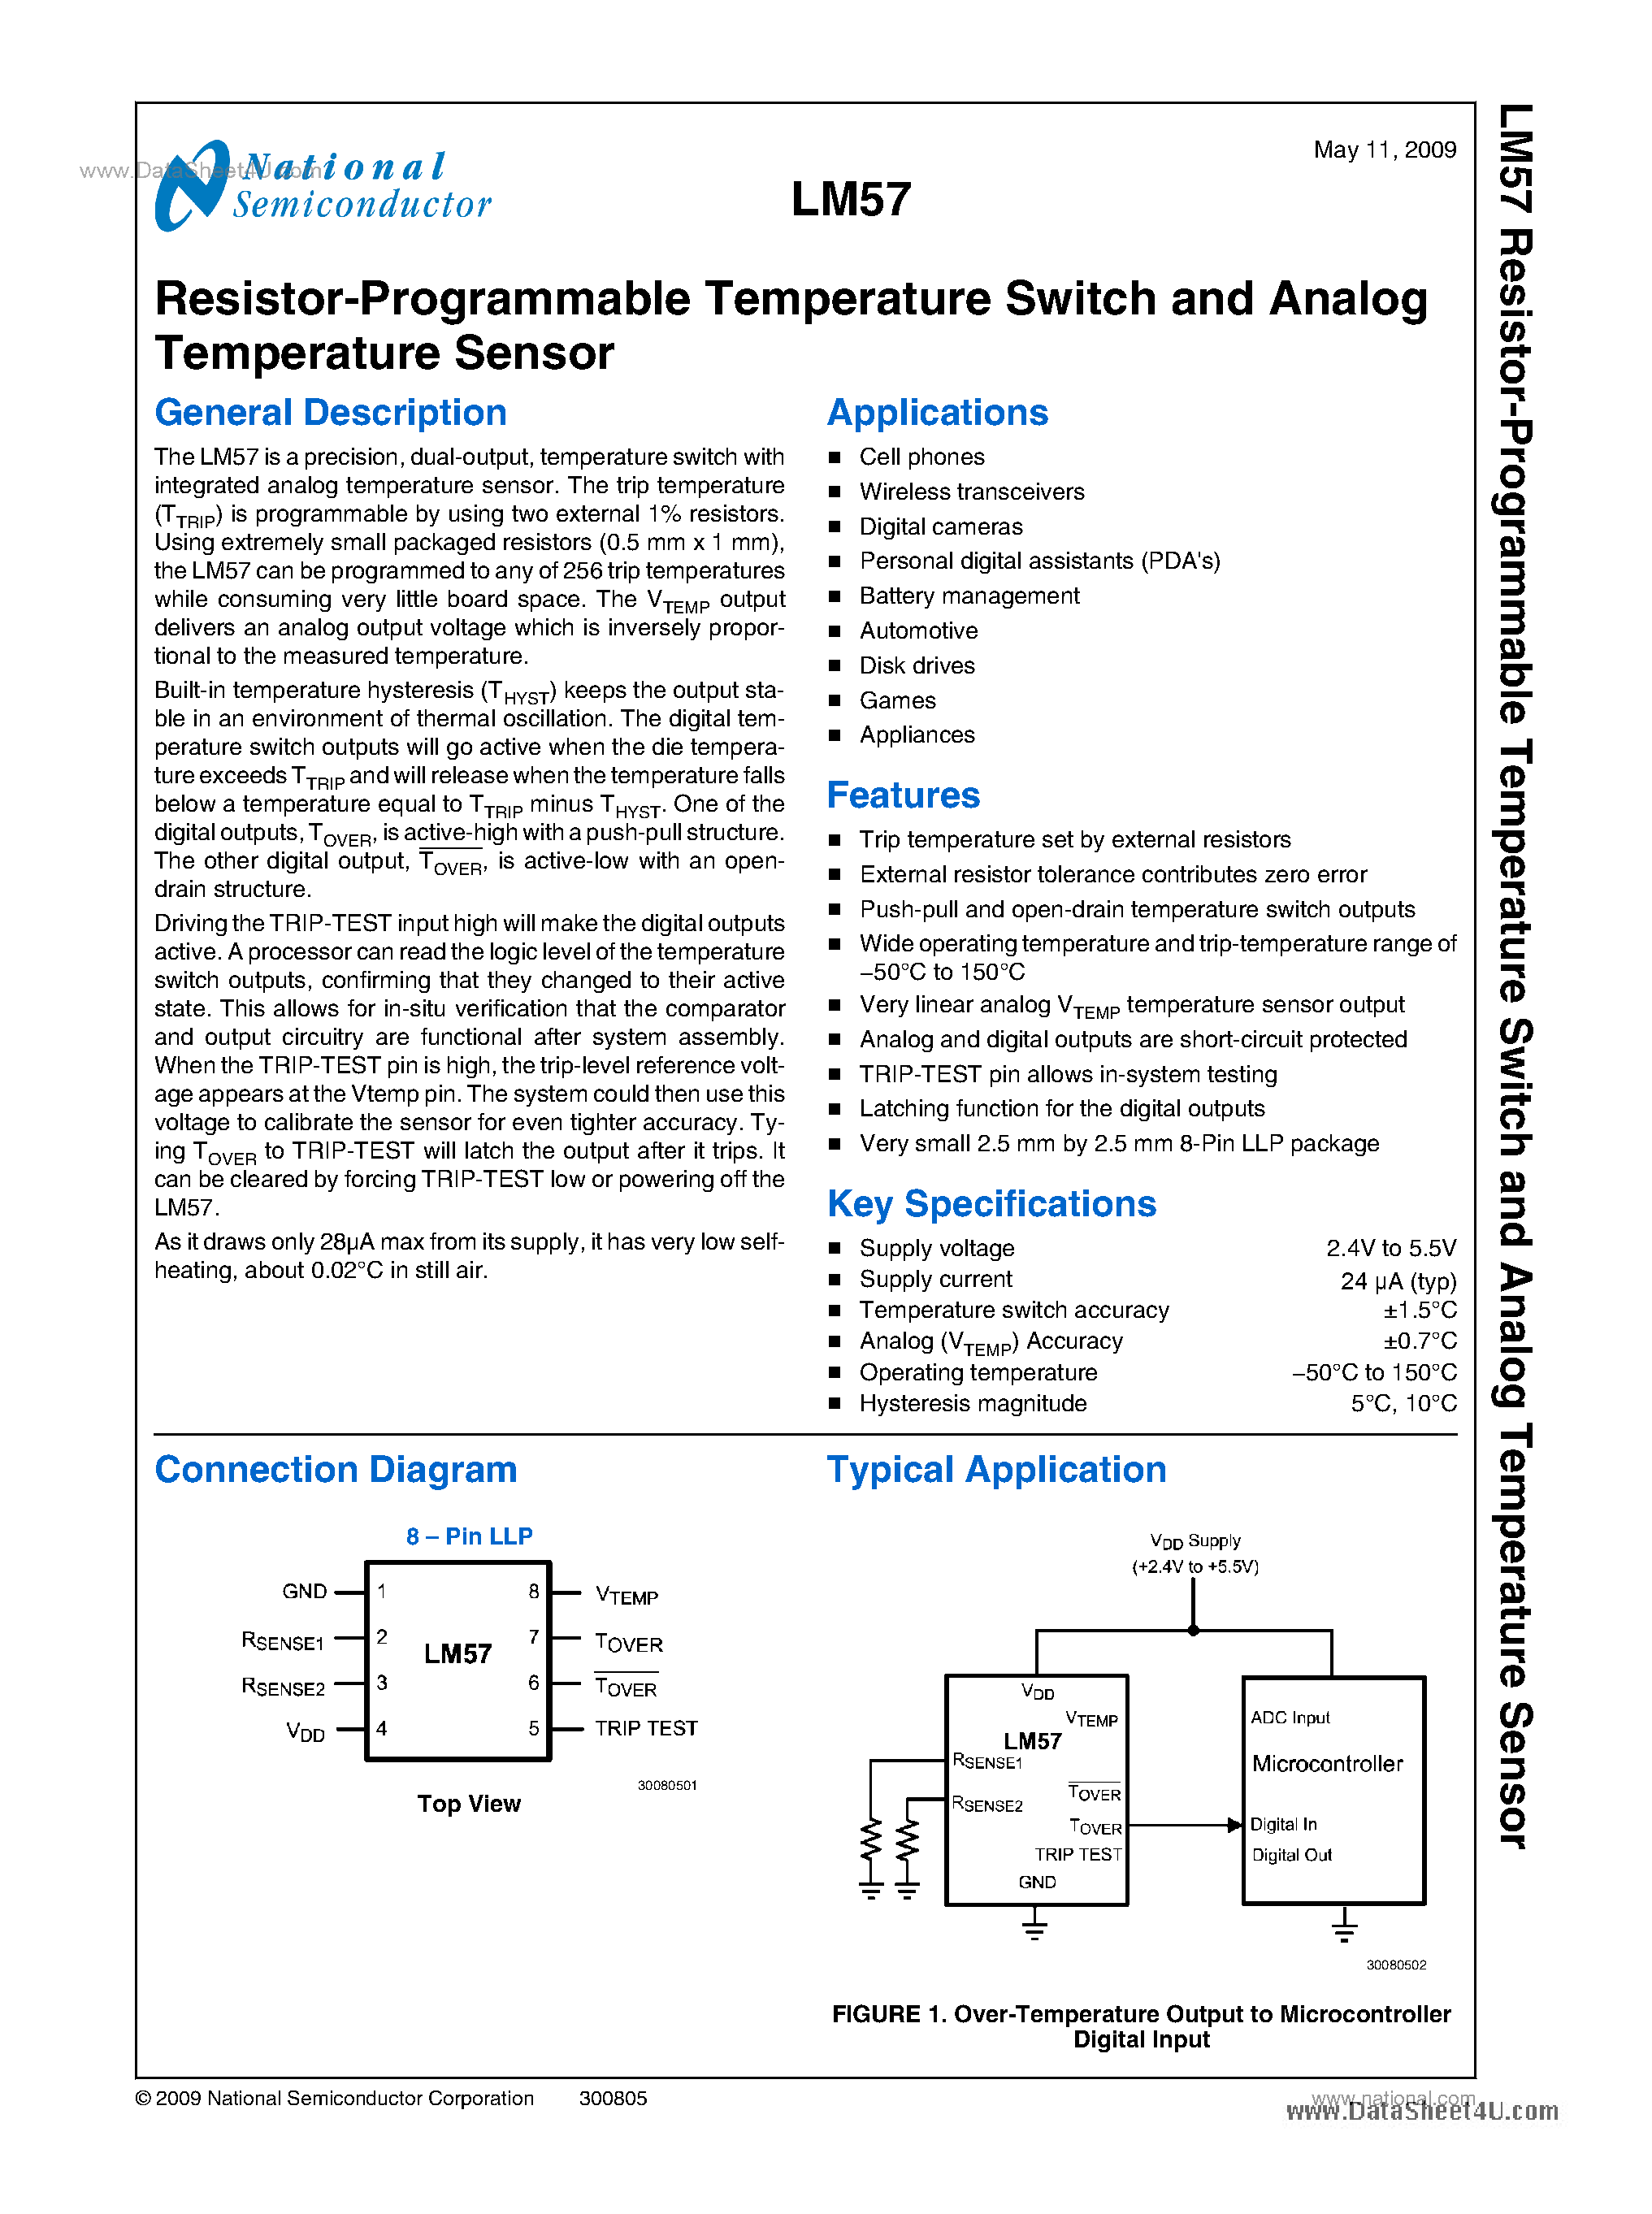 Datasheet LM57 - Resistor-Programmable Temperature Switch And Analog Temperature Sensor page 1